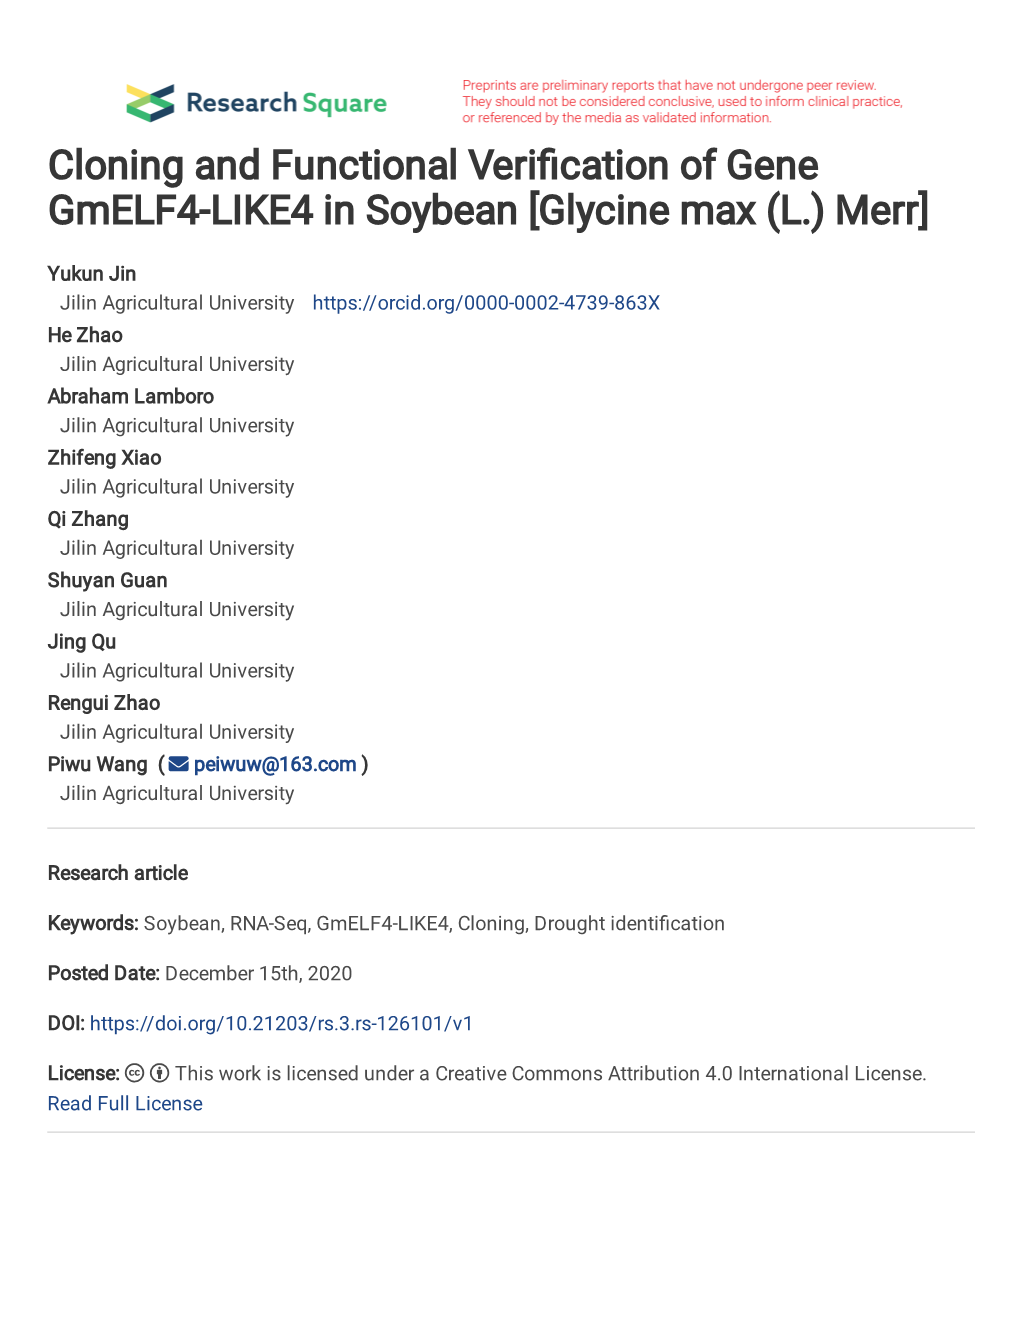 Cloning and Functional Verification of Gene Gmelf4-LIKE4 in Soybean